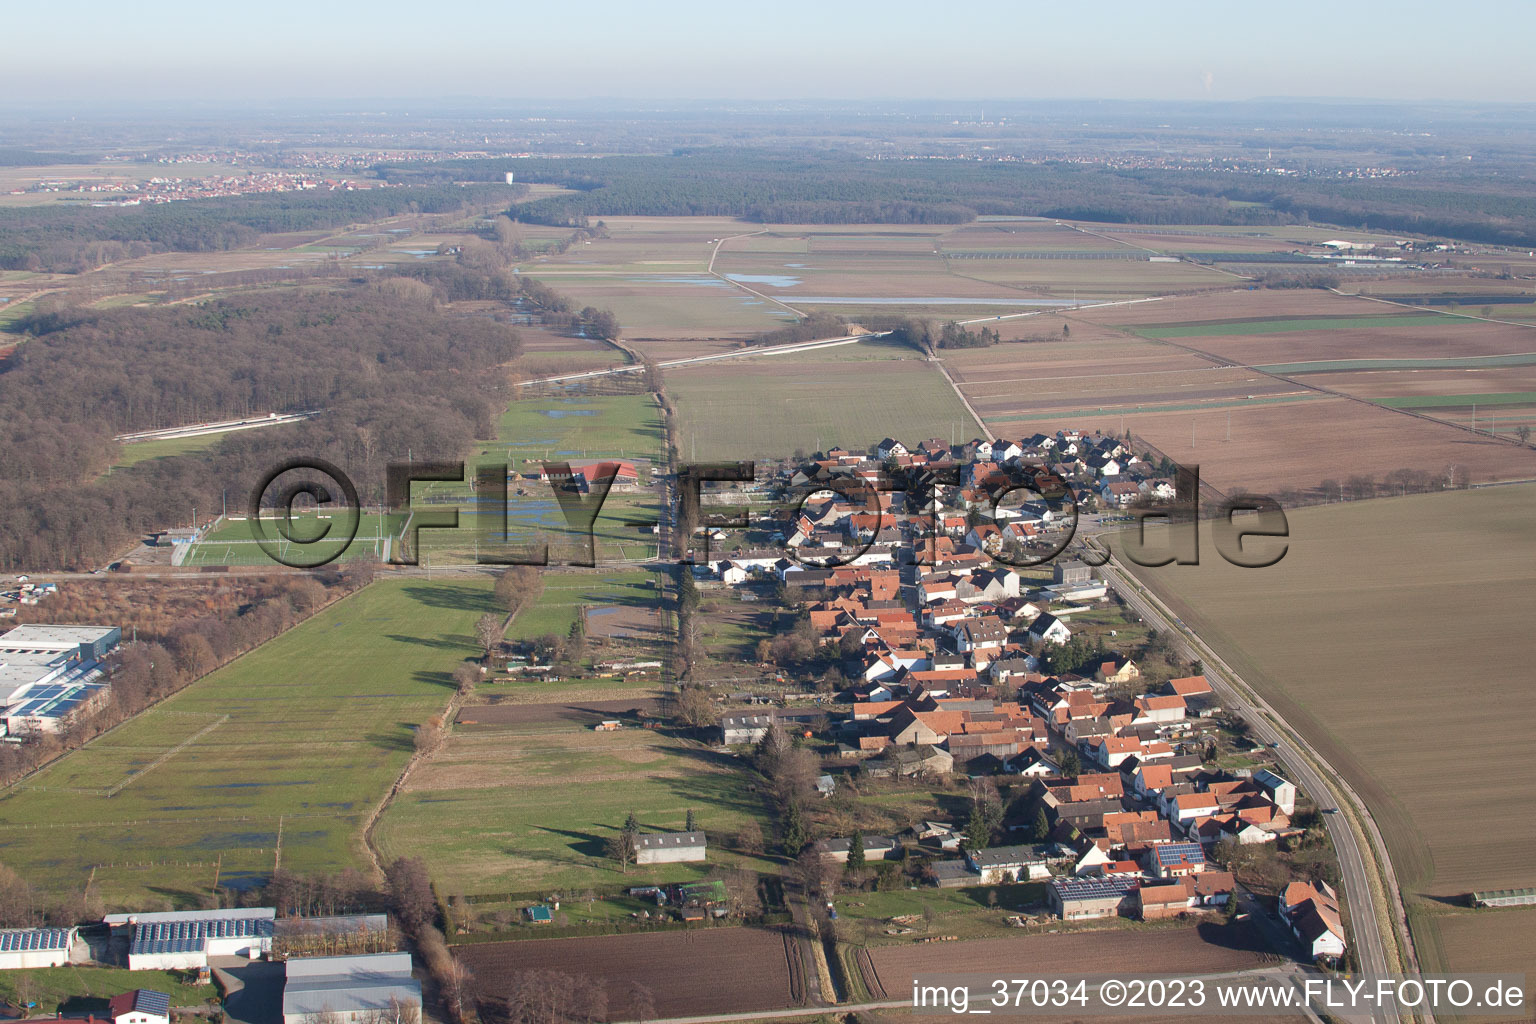 District Minderslachen in Kandel in the state Rhineland-Palatinate, Germany from above